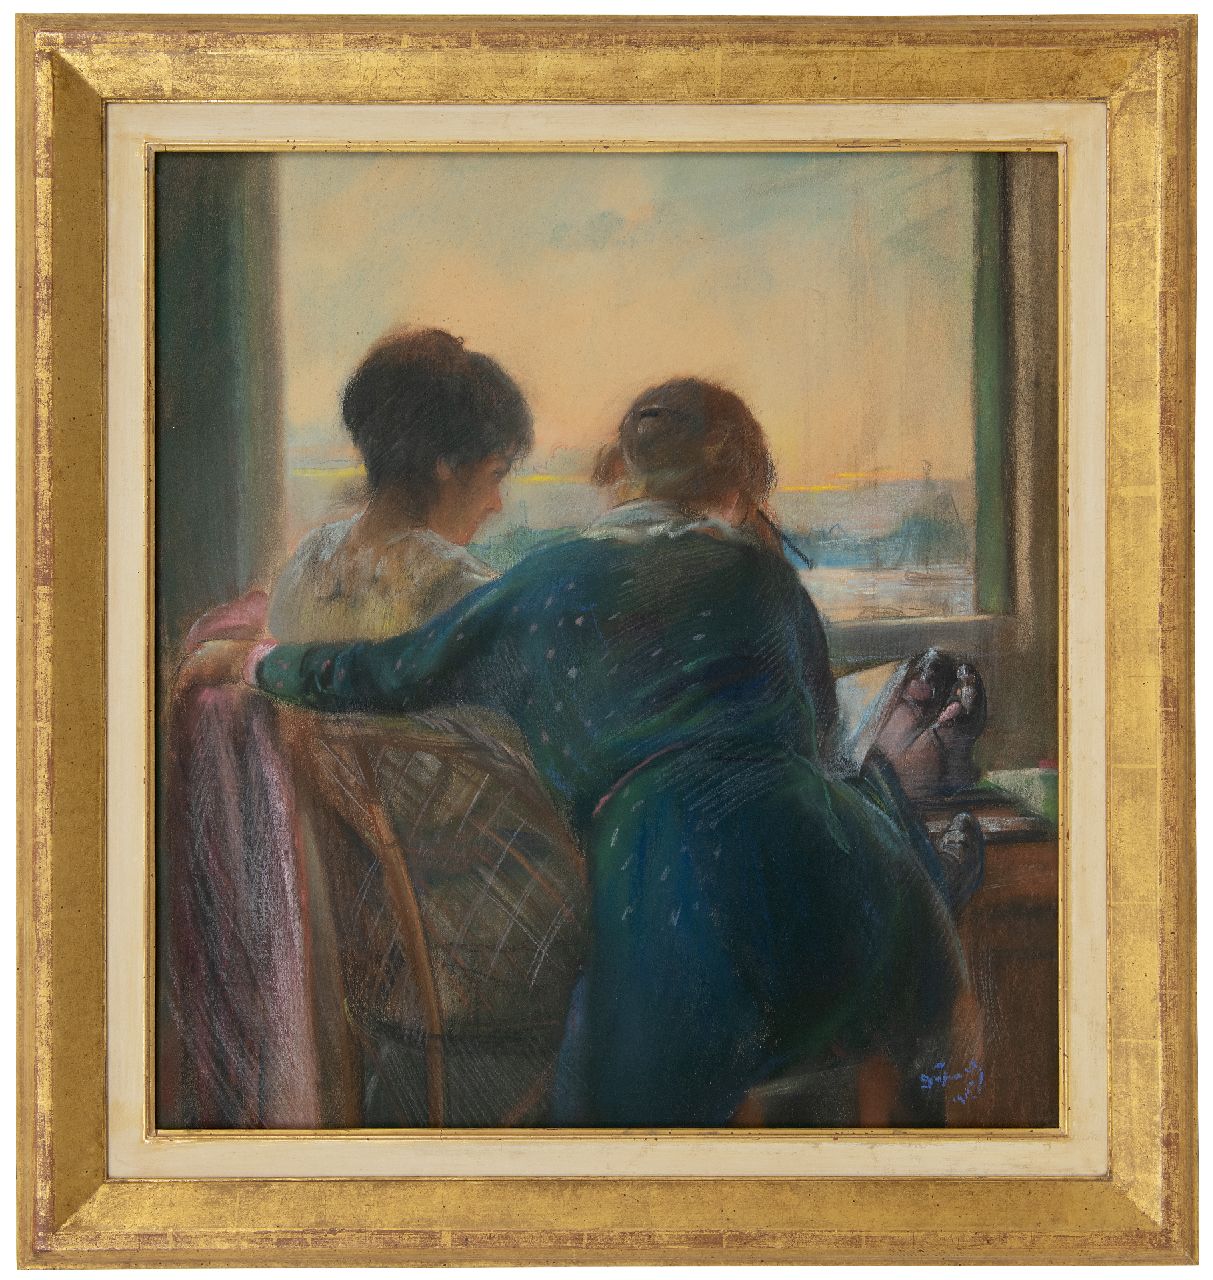 Dijkwel M.  | Mattheus 'Theo' Dijkwel, Two girls at the window, pastel on paper 55.0 x 50.7 cm, signed l.r. and dated 1915